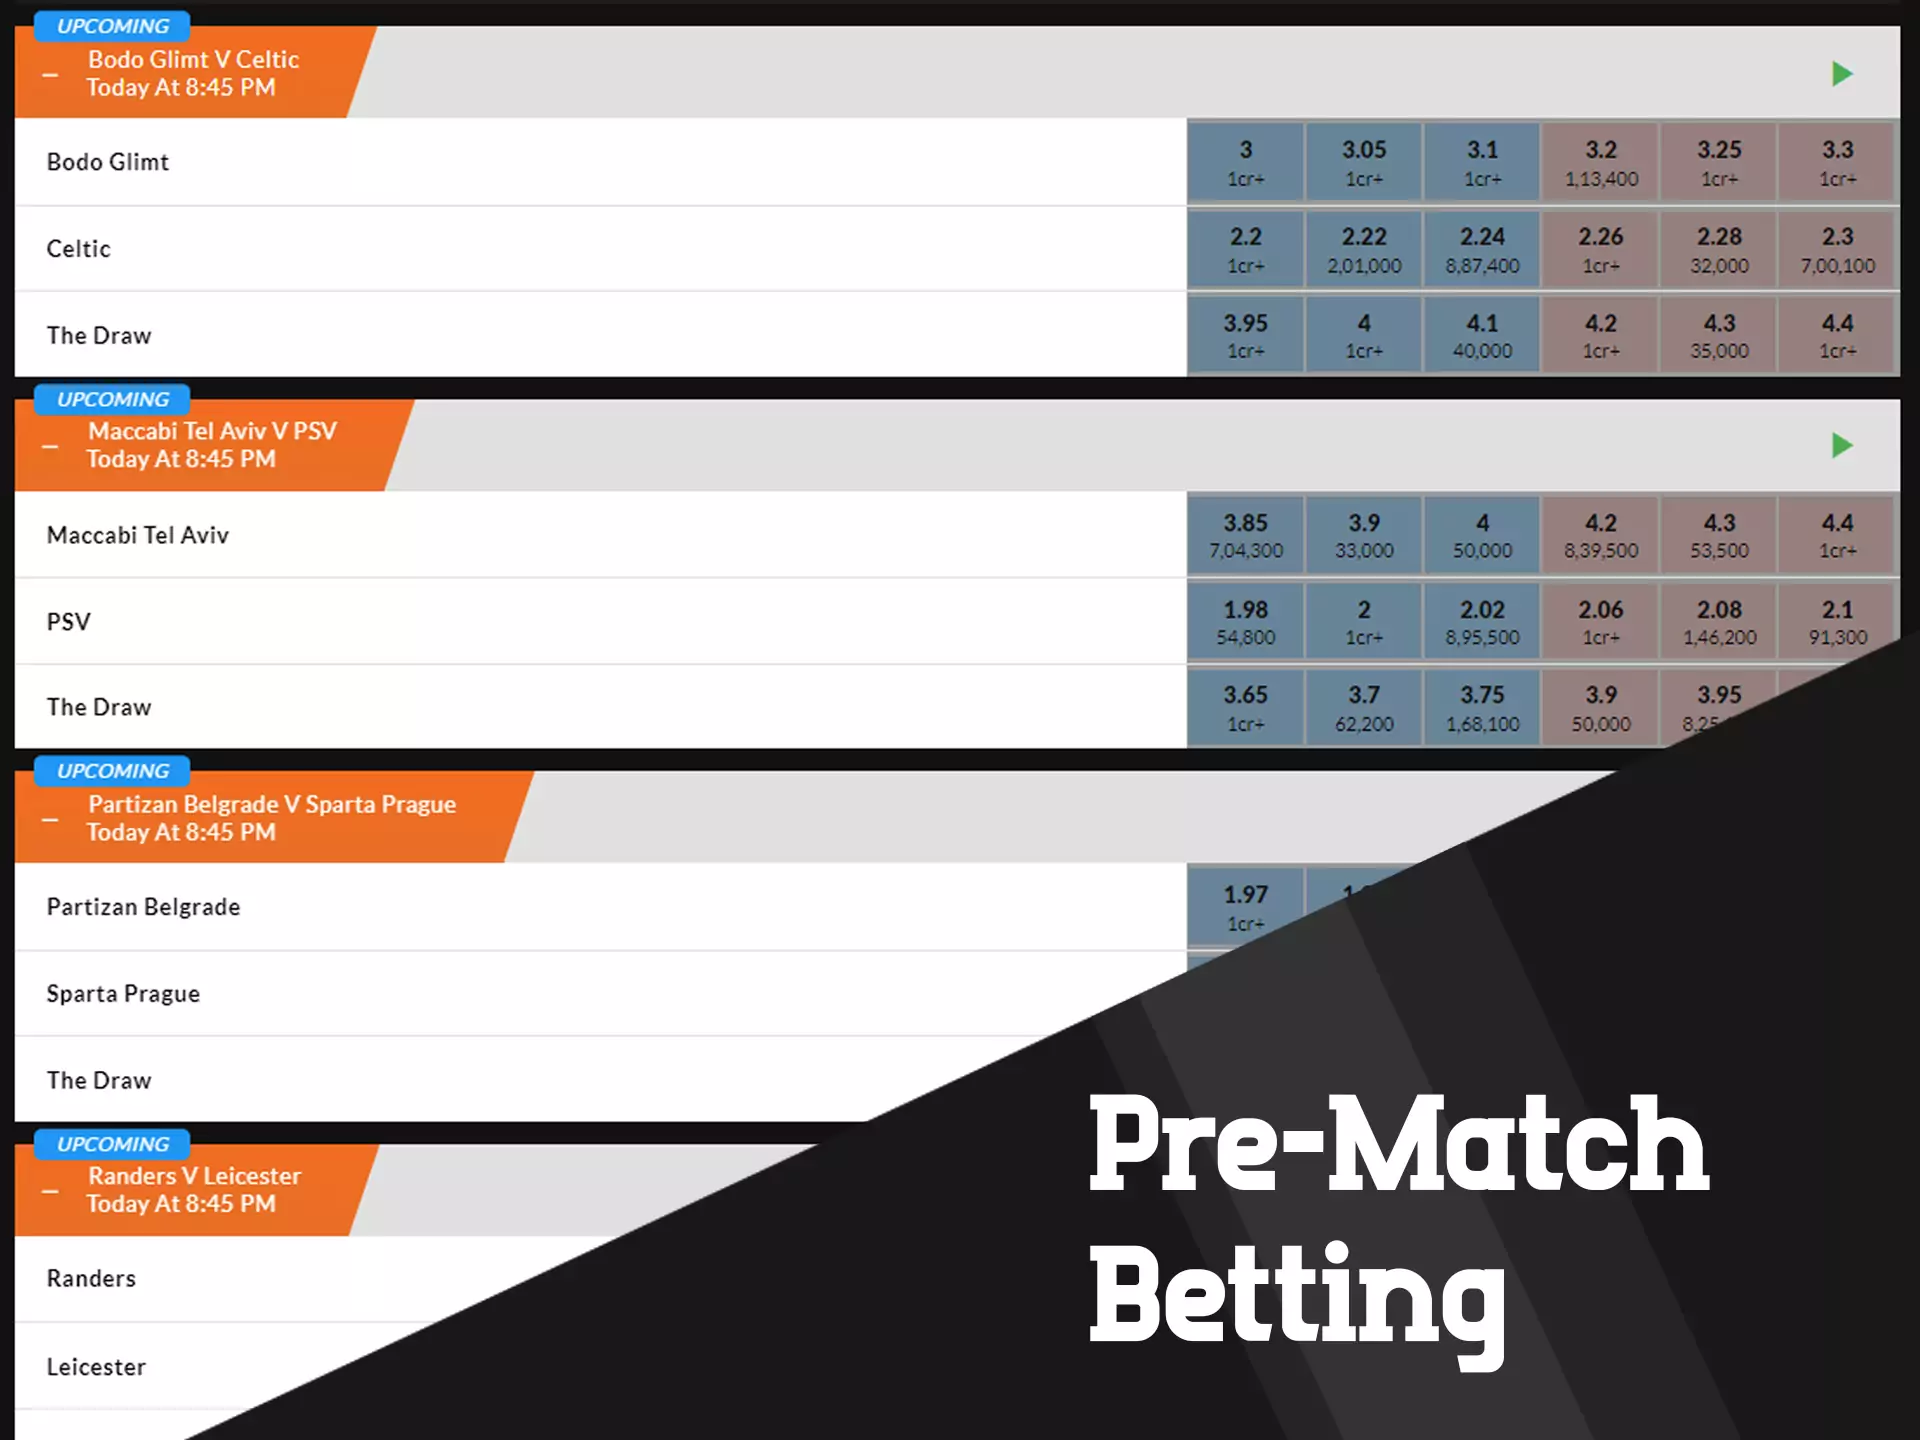 The Fairplay app supports pre-match betting.